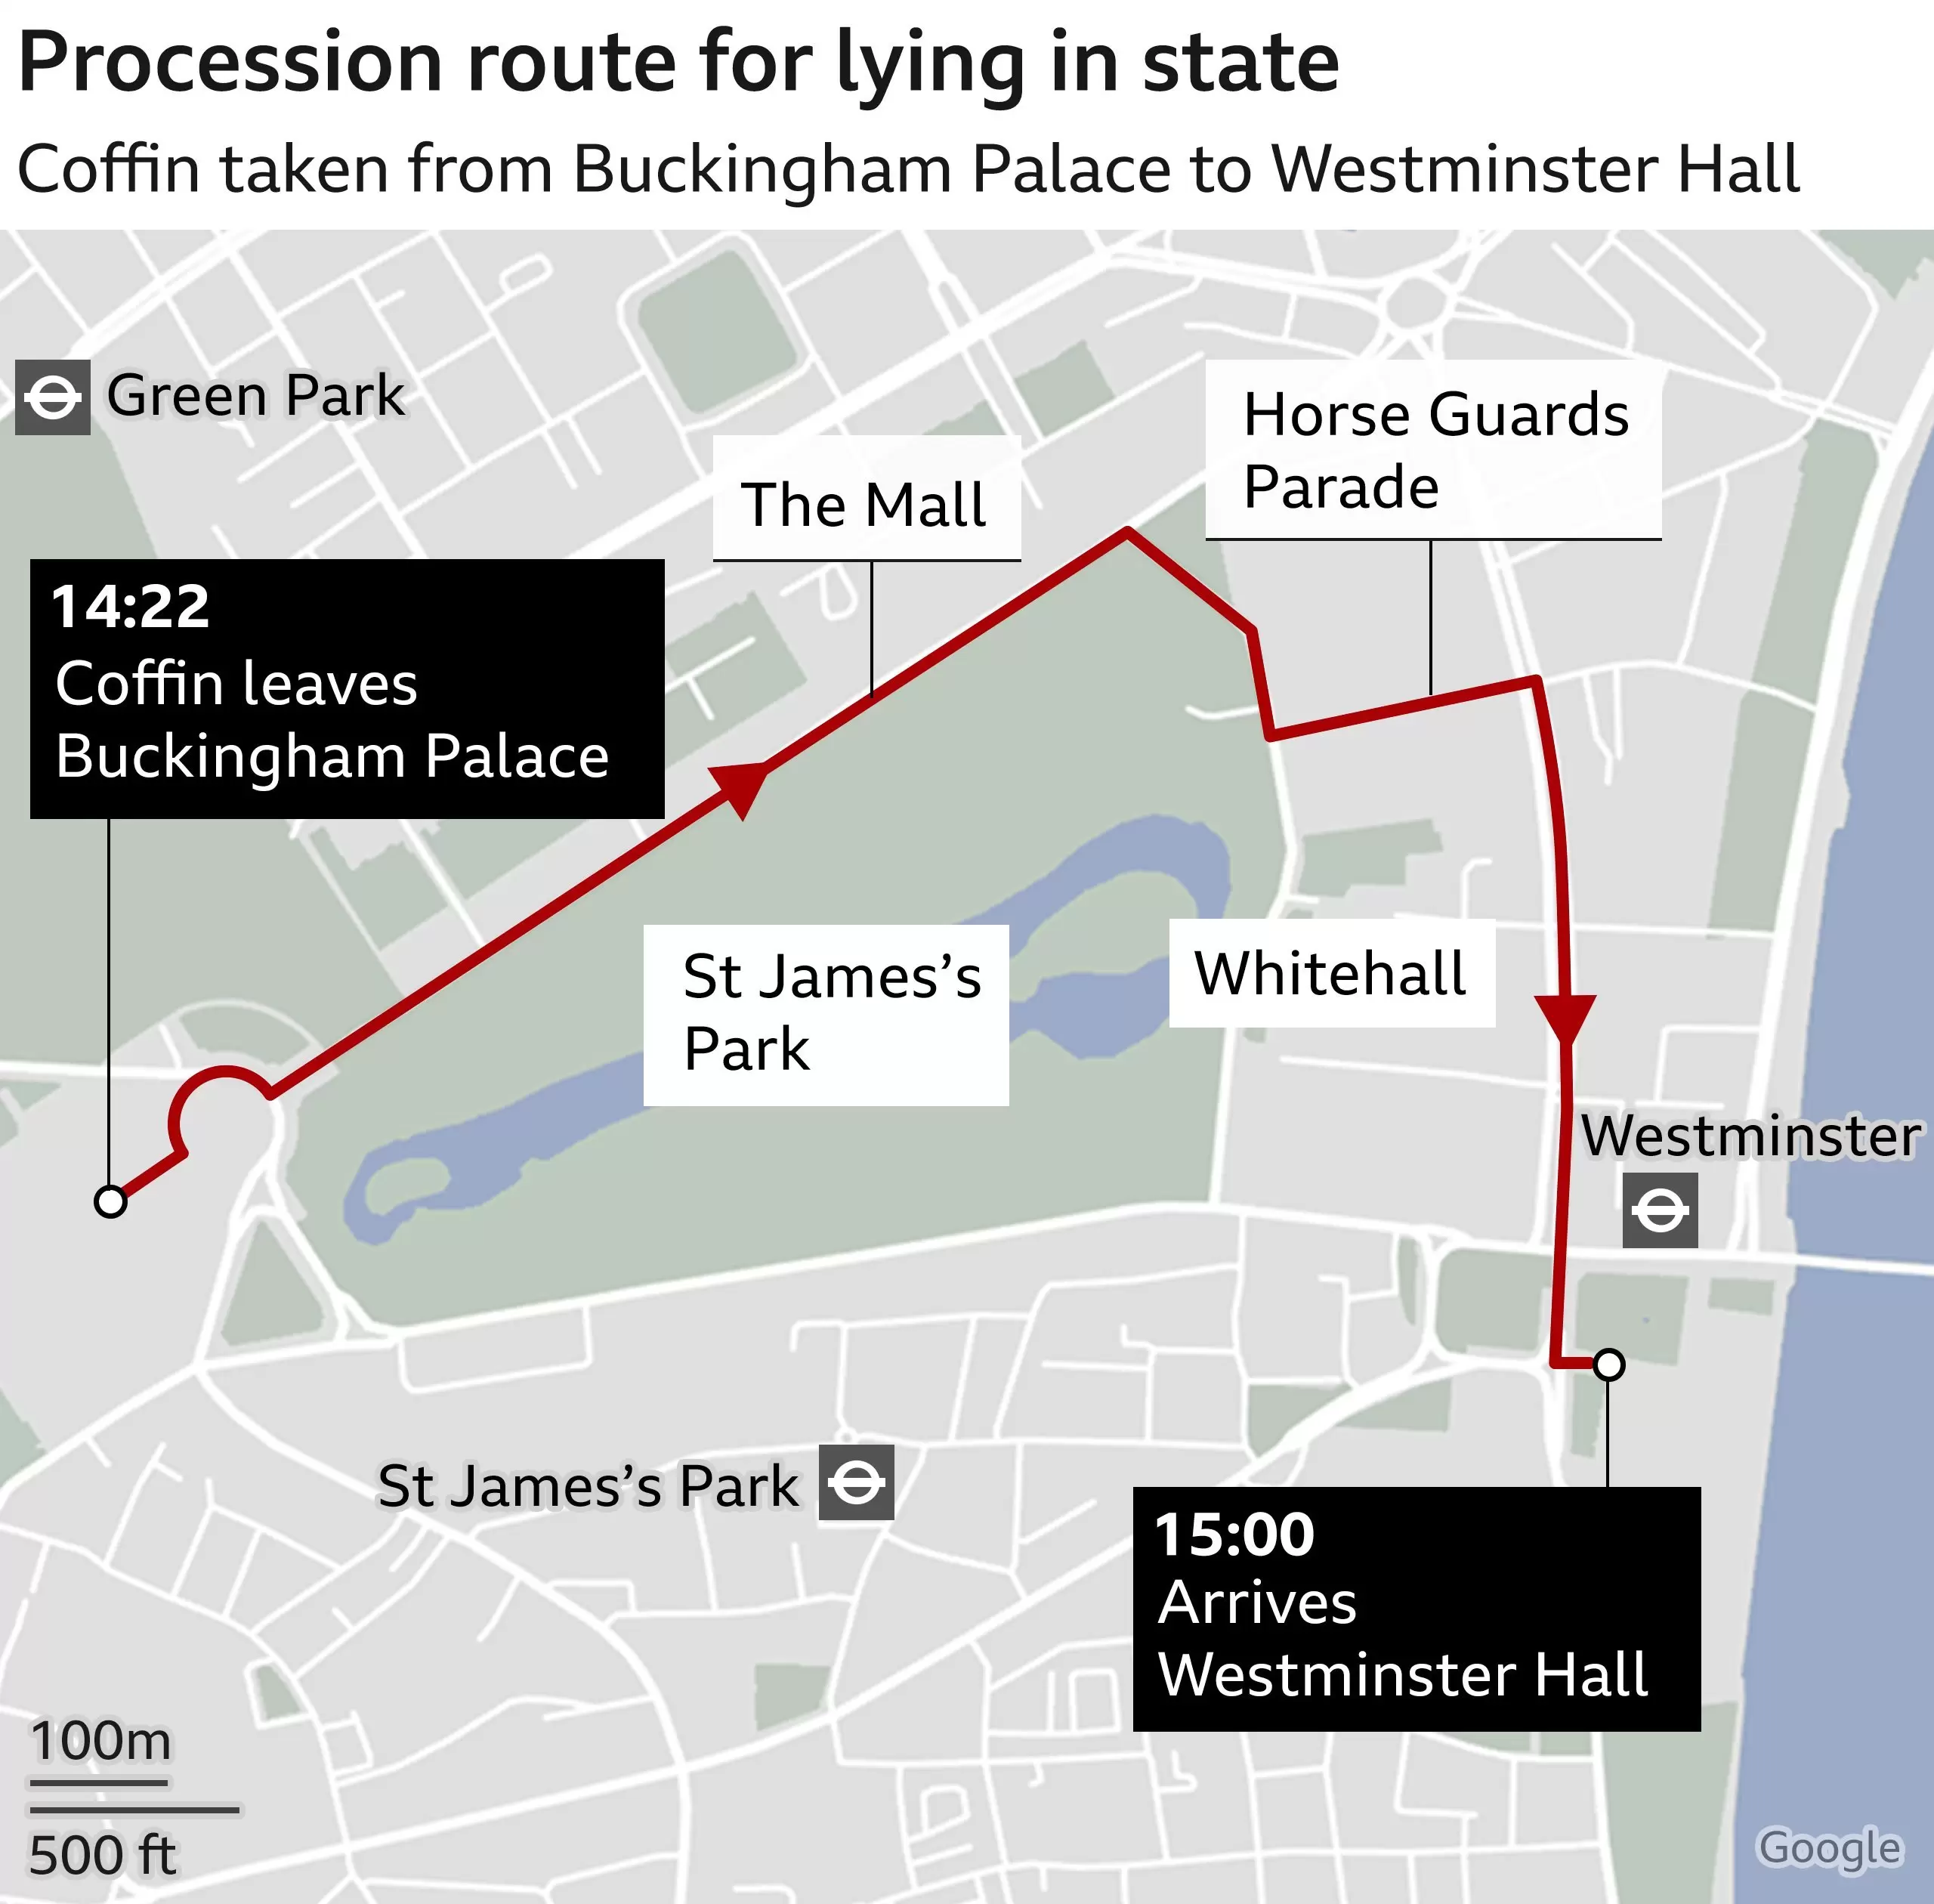 Procession route for lying in state